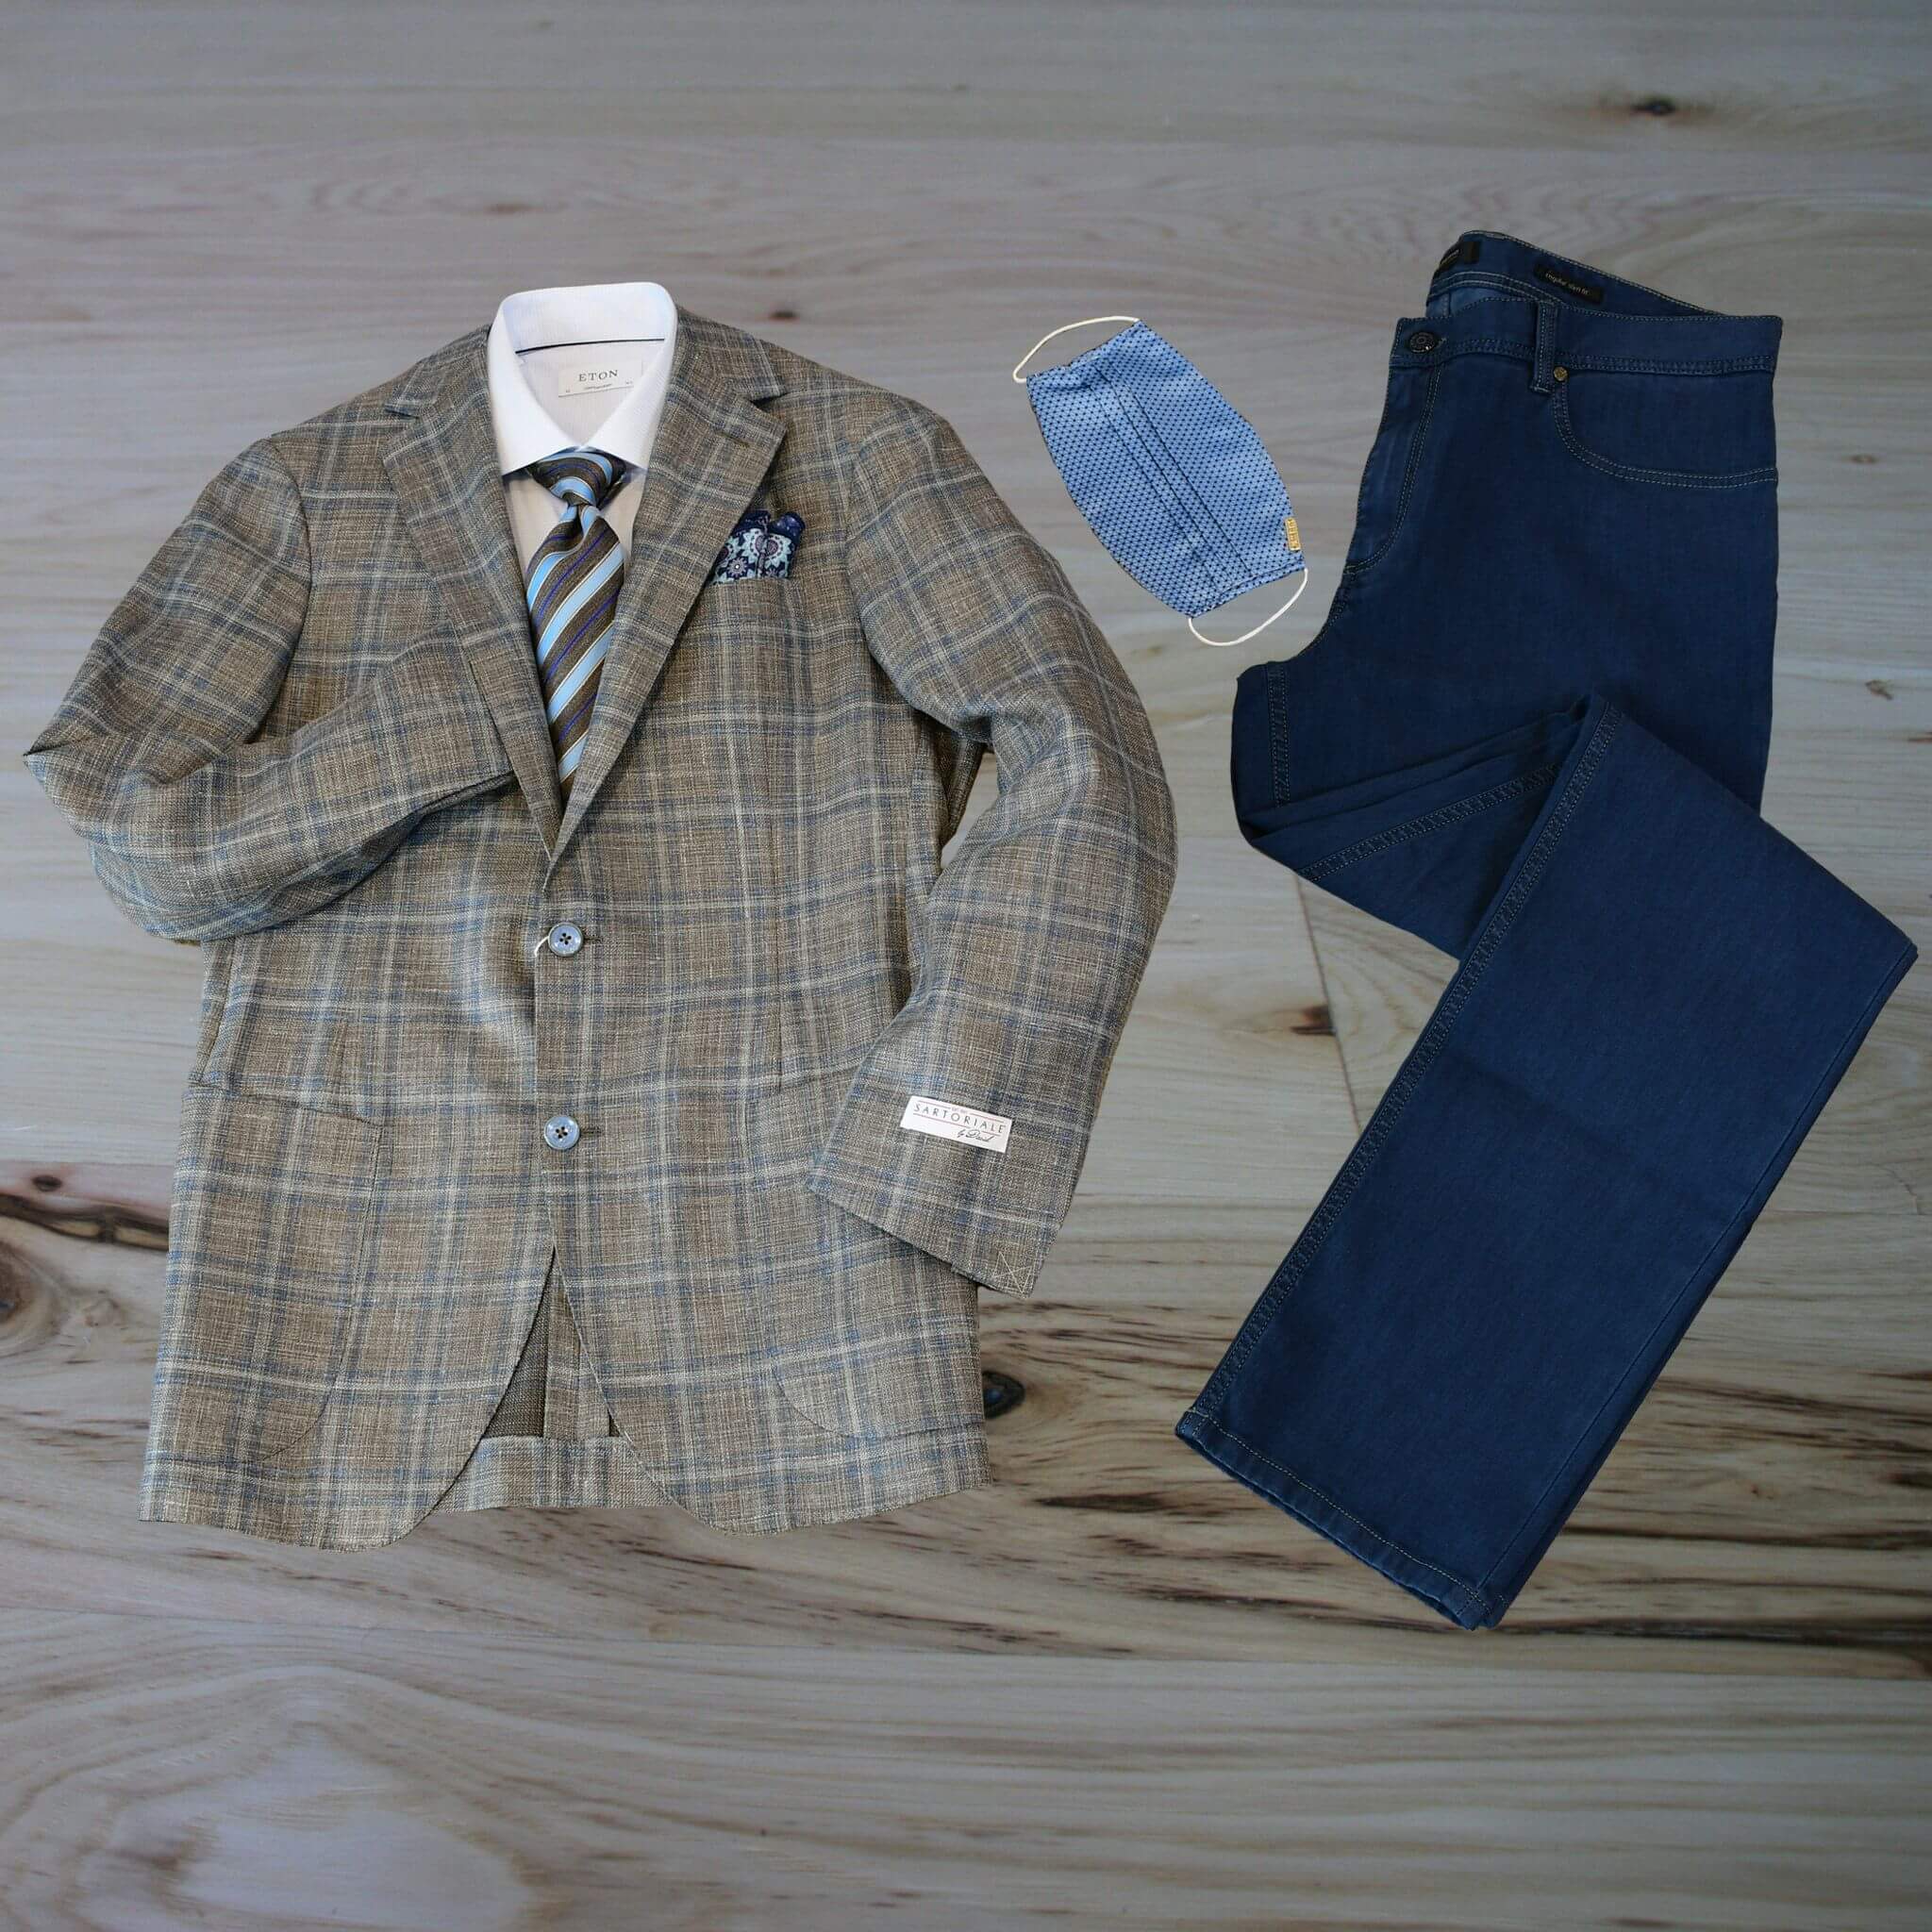 Sartoriale - Davelle Clothiers - Invest in your style